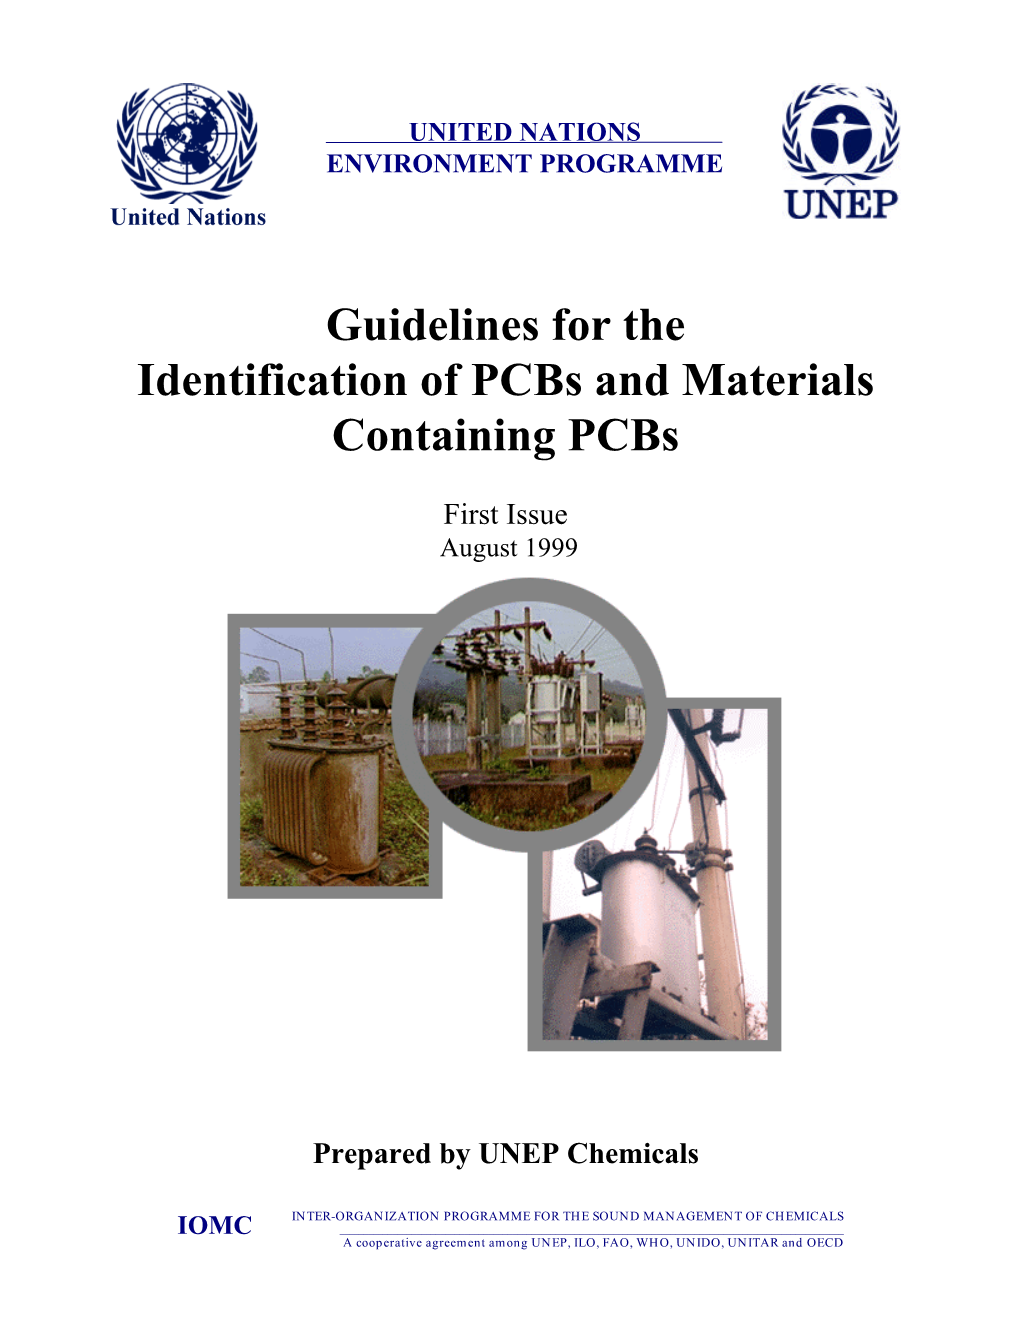 Guidelines for the Identification of Pcbs and Materials Containing Pcbs